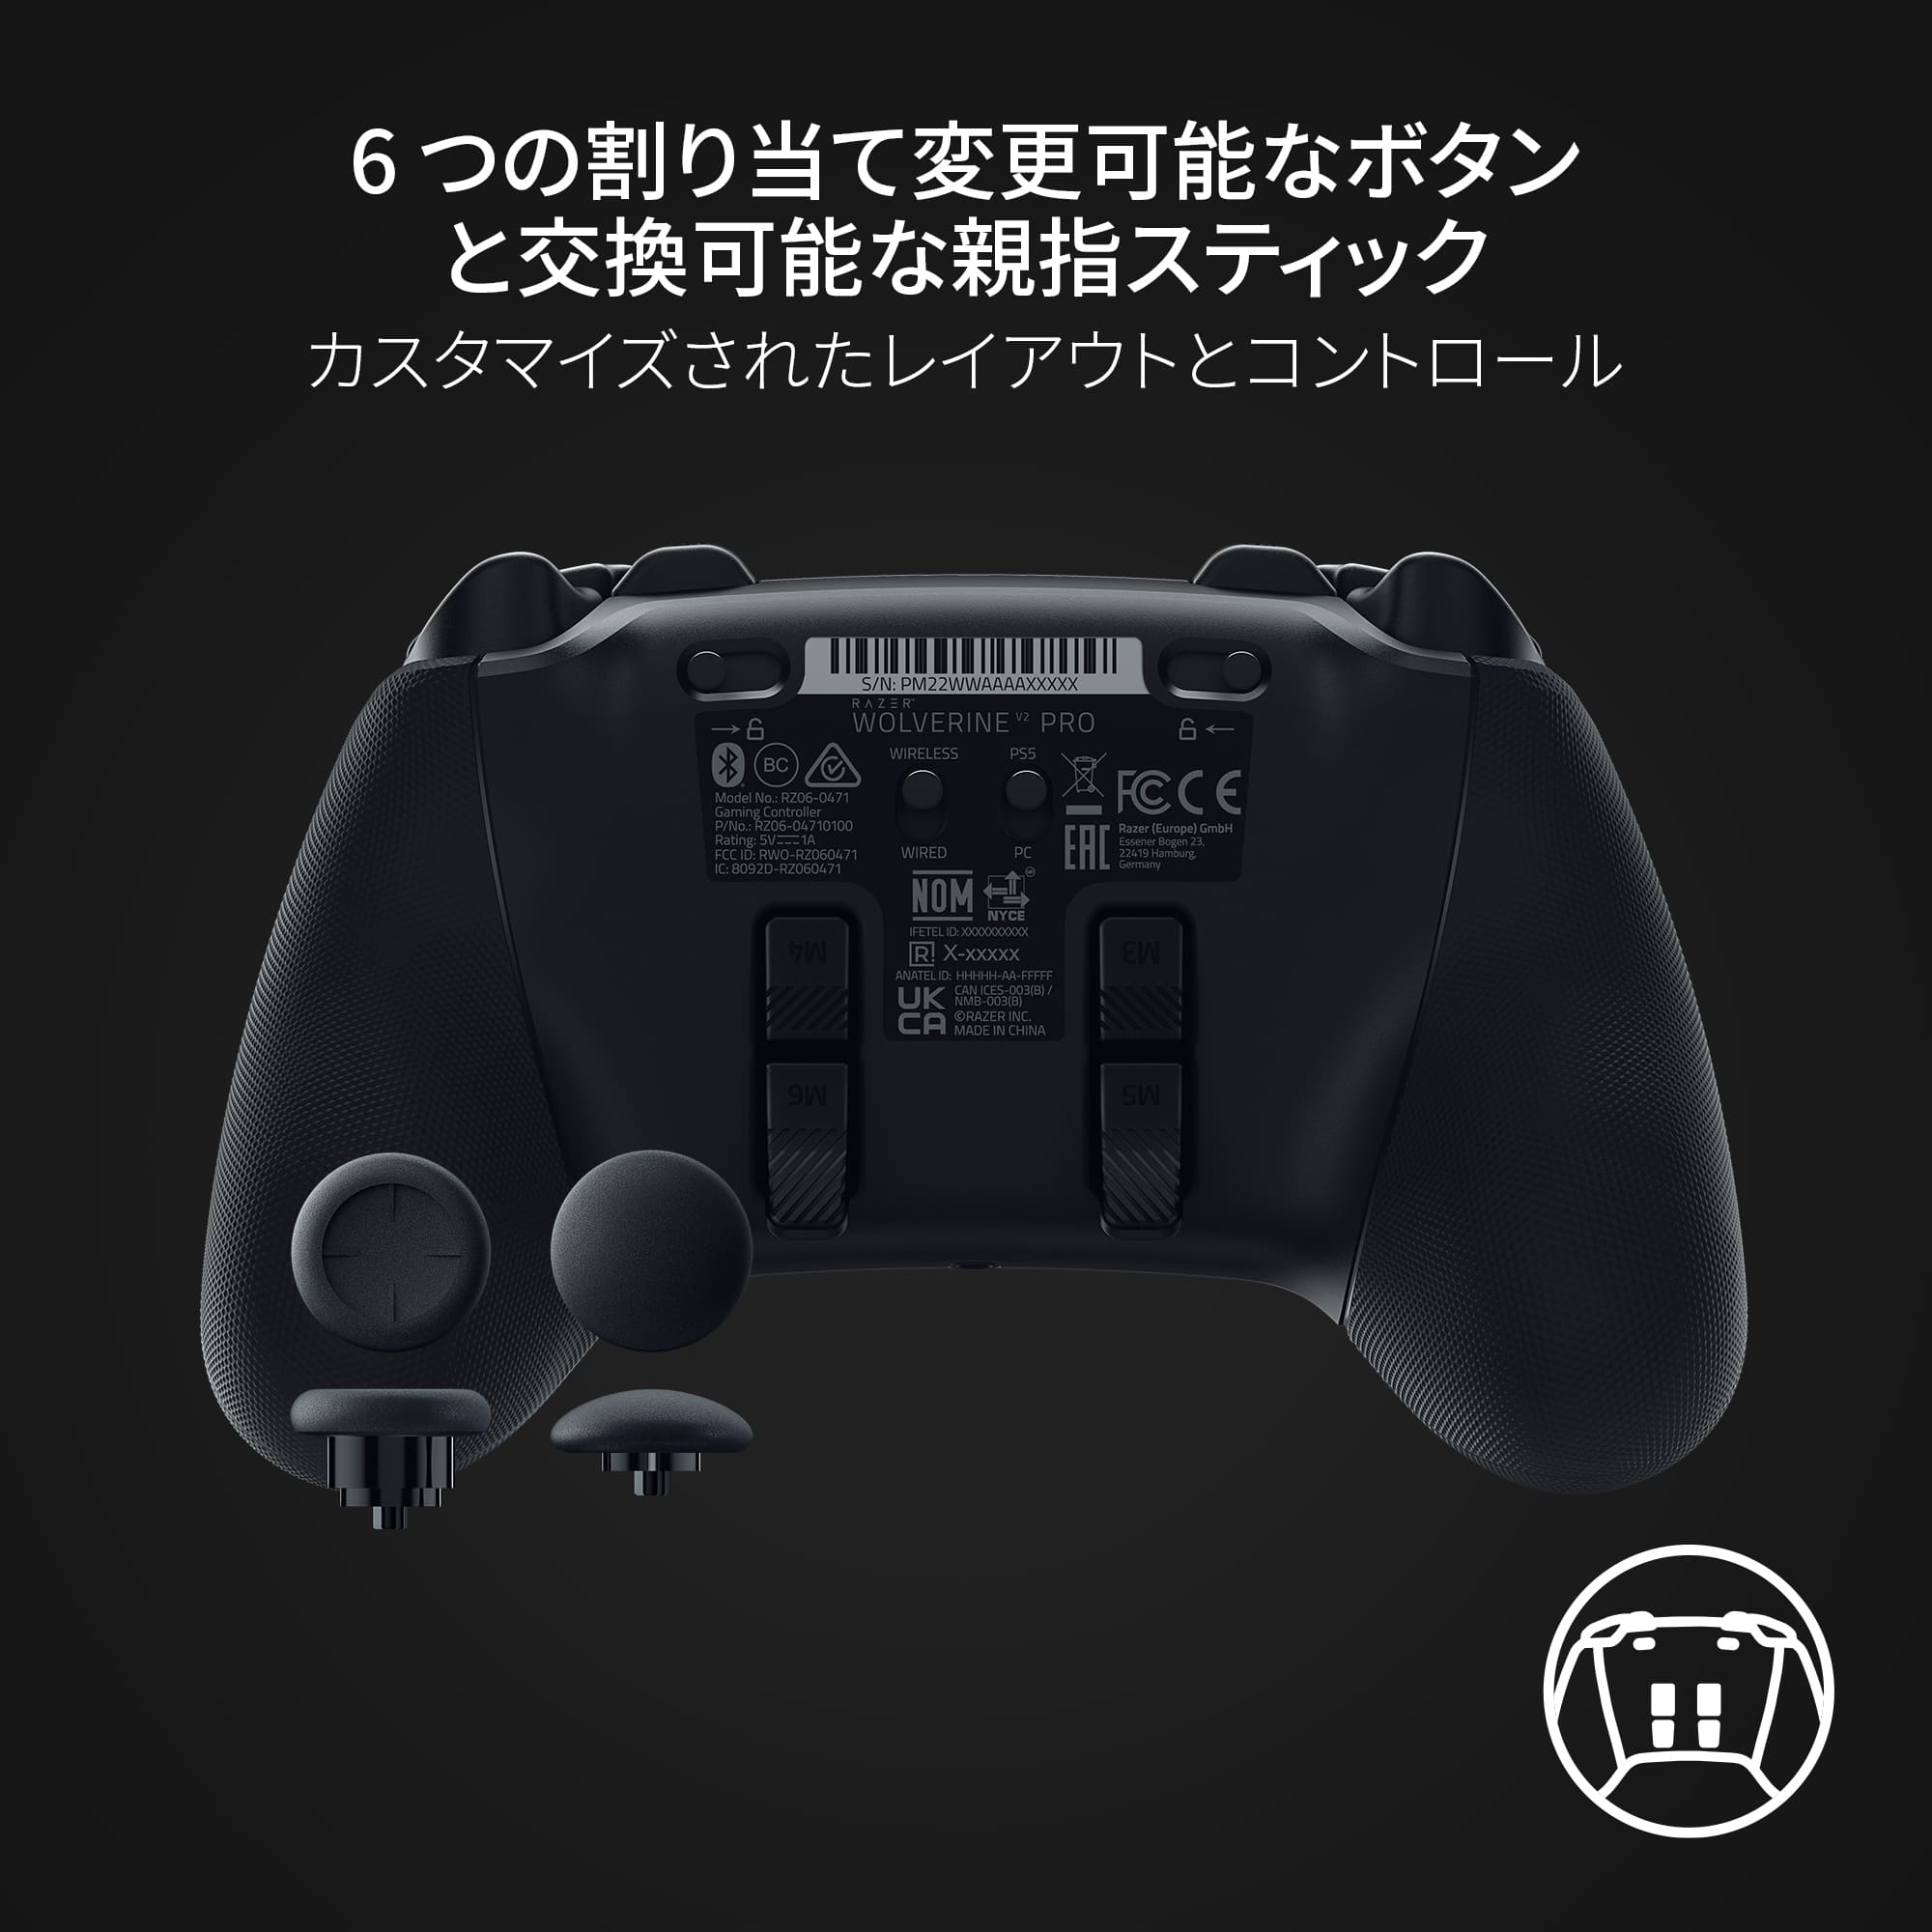 Razer Wolverine V2 Pro White Edition ウルヴァリン ブイツー プロ ホワイト | GRAPHT OFFICIAL  STORE